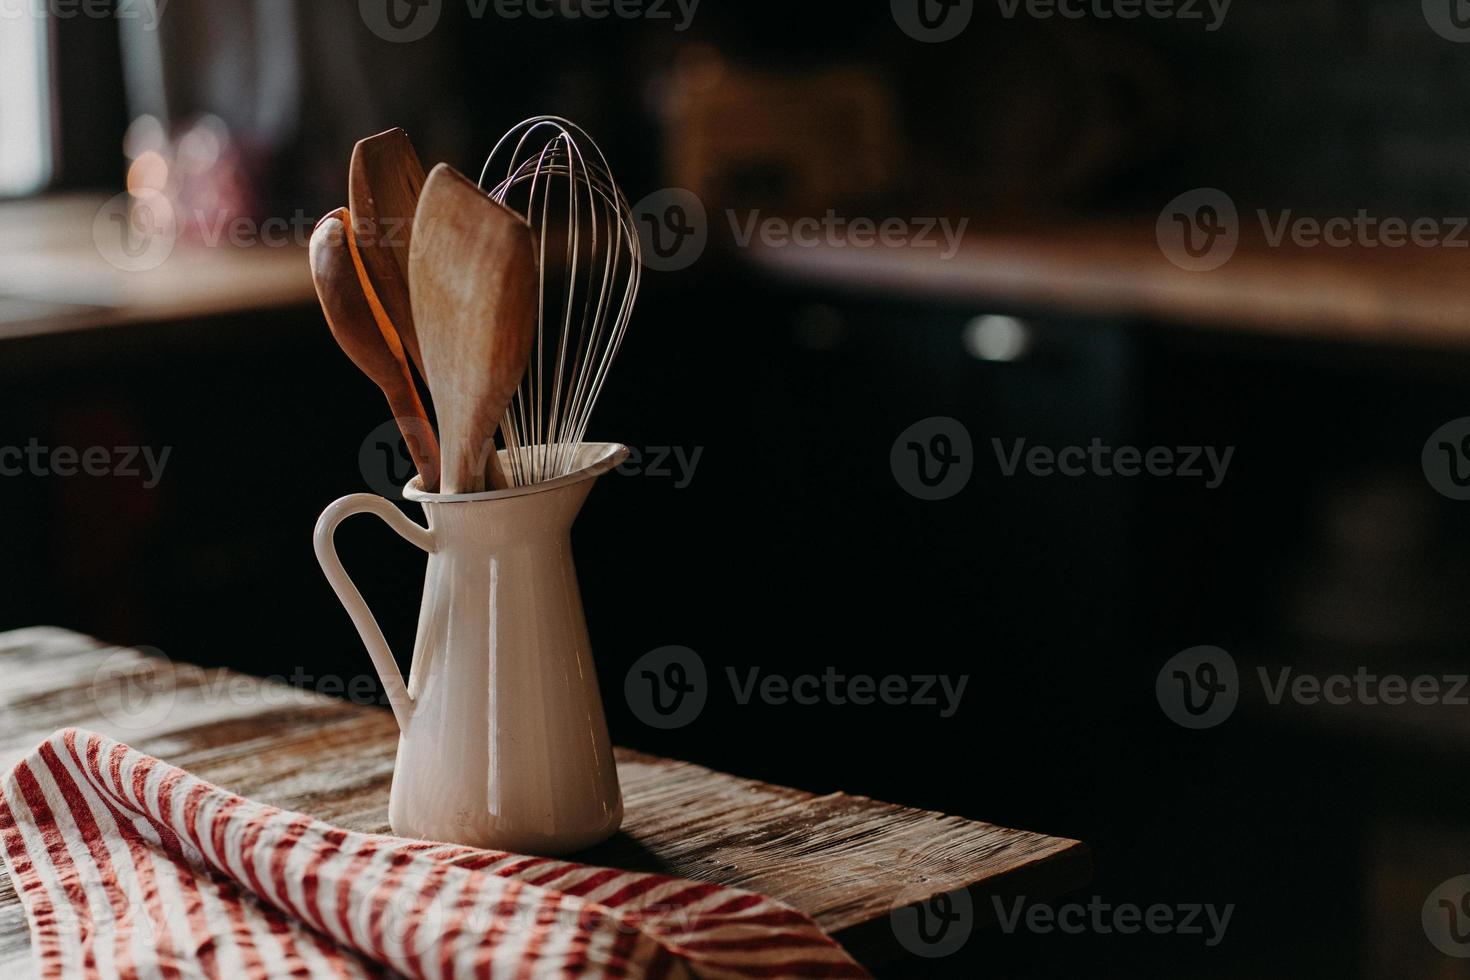 Kitchen accessories on wooden table. Utensils in white ceramic jar against dark background. Rustic style. Dishware for preparing meal. Wooden spoons shpatula and whisk photo